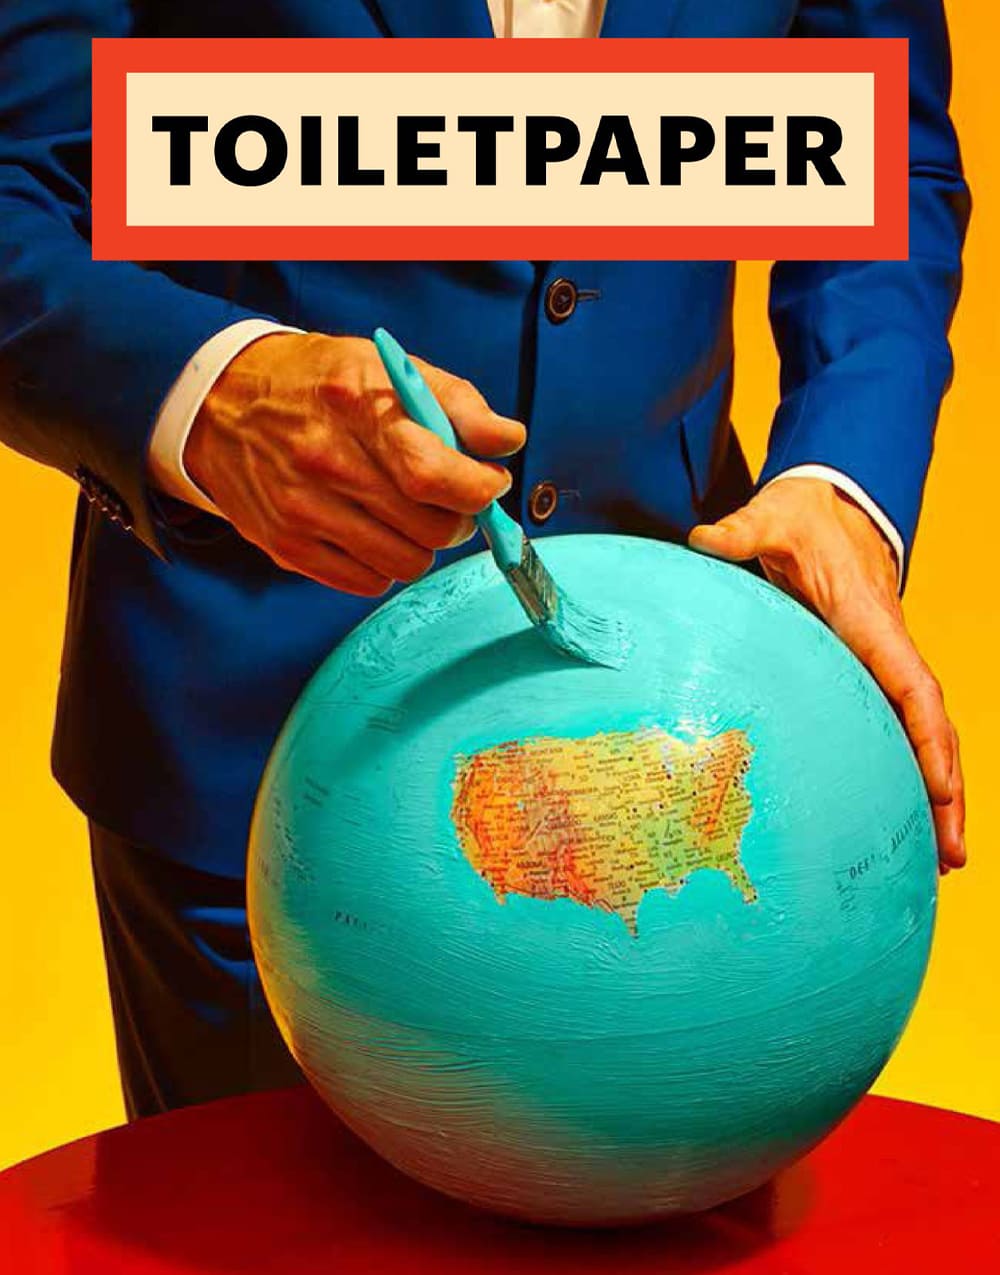 Toiletpaper N. 12 by Maurizio Cattelan and Pierpaolo Ferrari